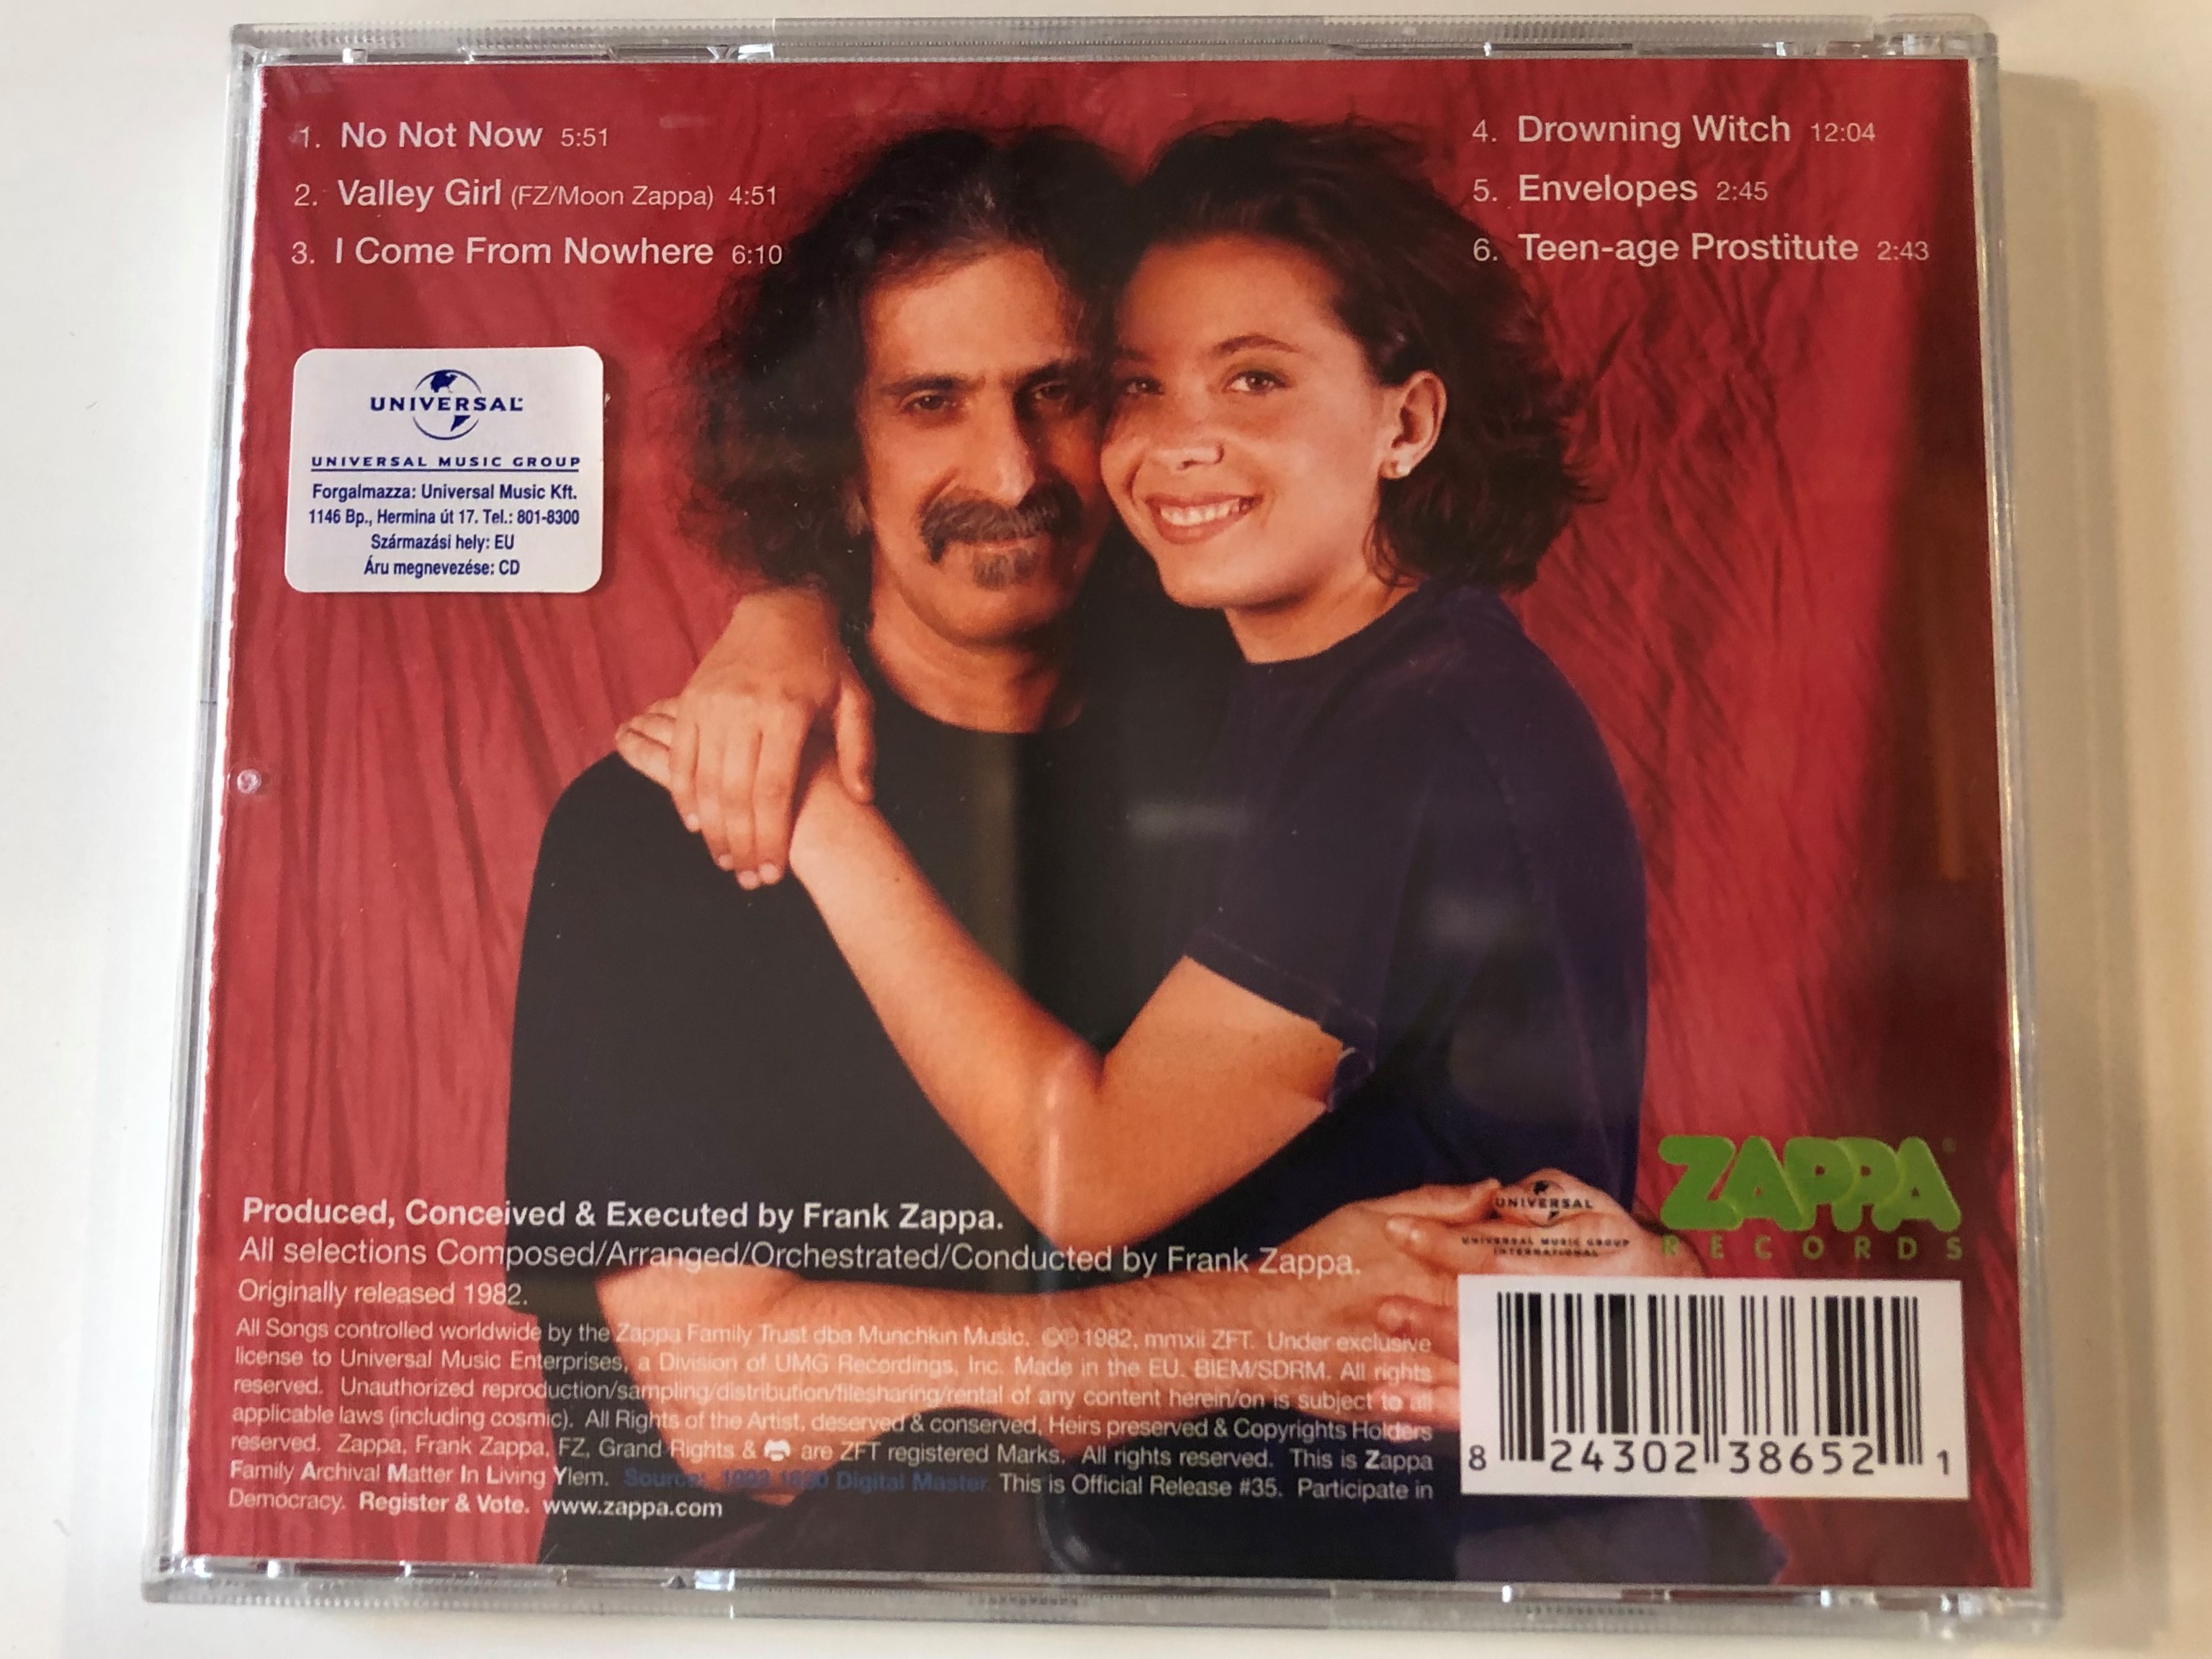 zappa-ship-arriving-too-late-to-save-a-drowning-witch-zappa-records-audio-cd-2012-0238652-2-.jpg